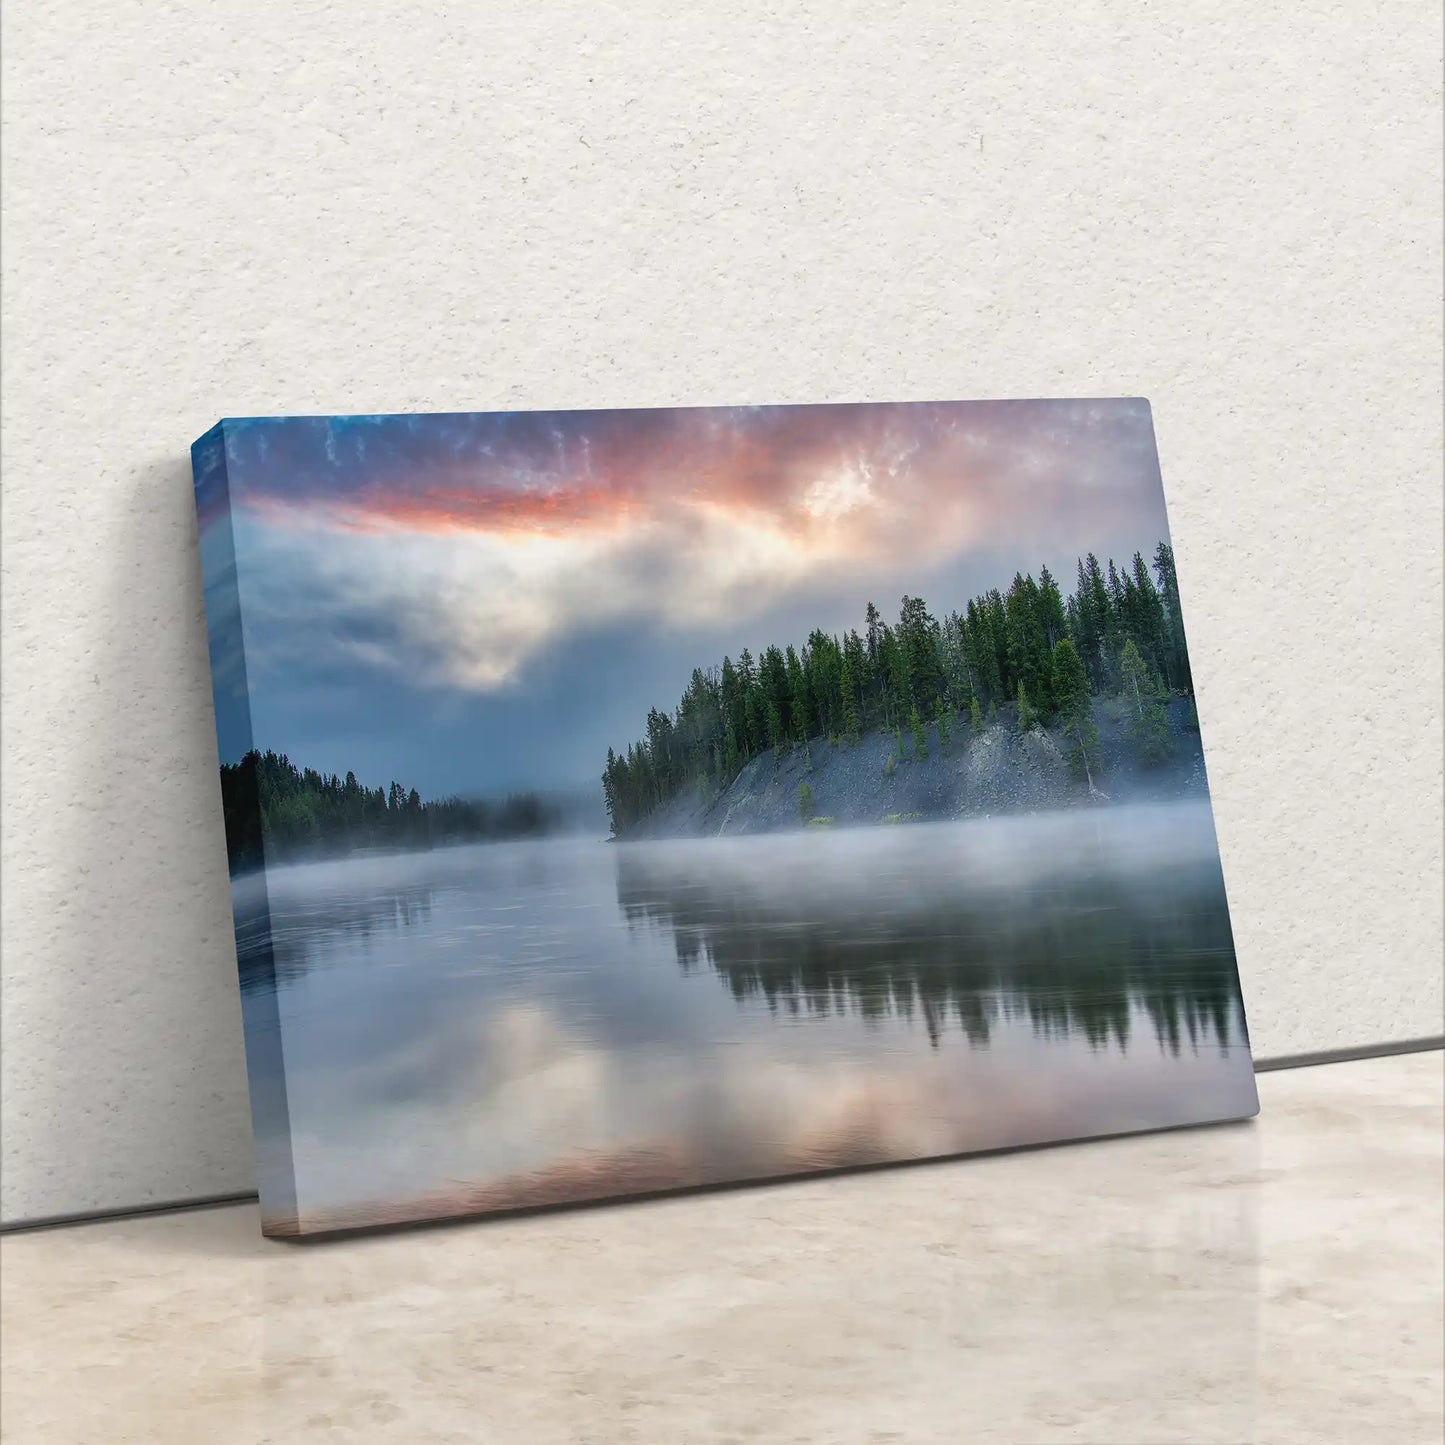 Canvas wall art leaning against a wall, depicting Yellowstone Lake Forest and its reflection under a stormy sunrise sky.